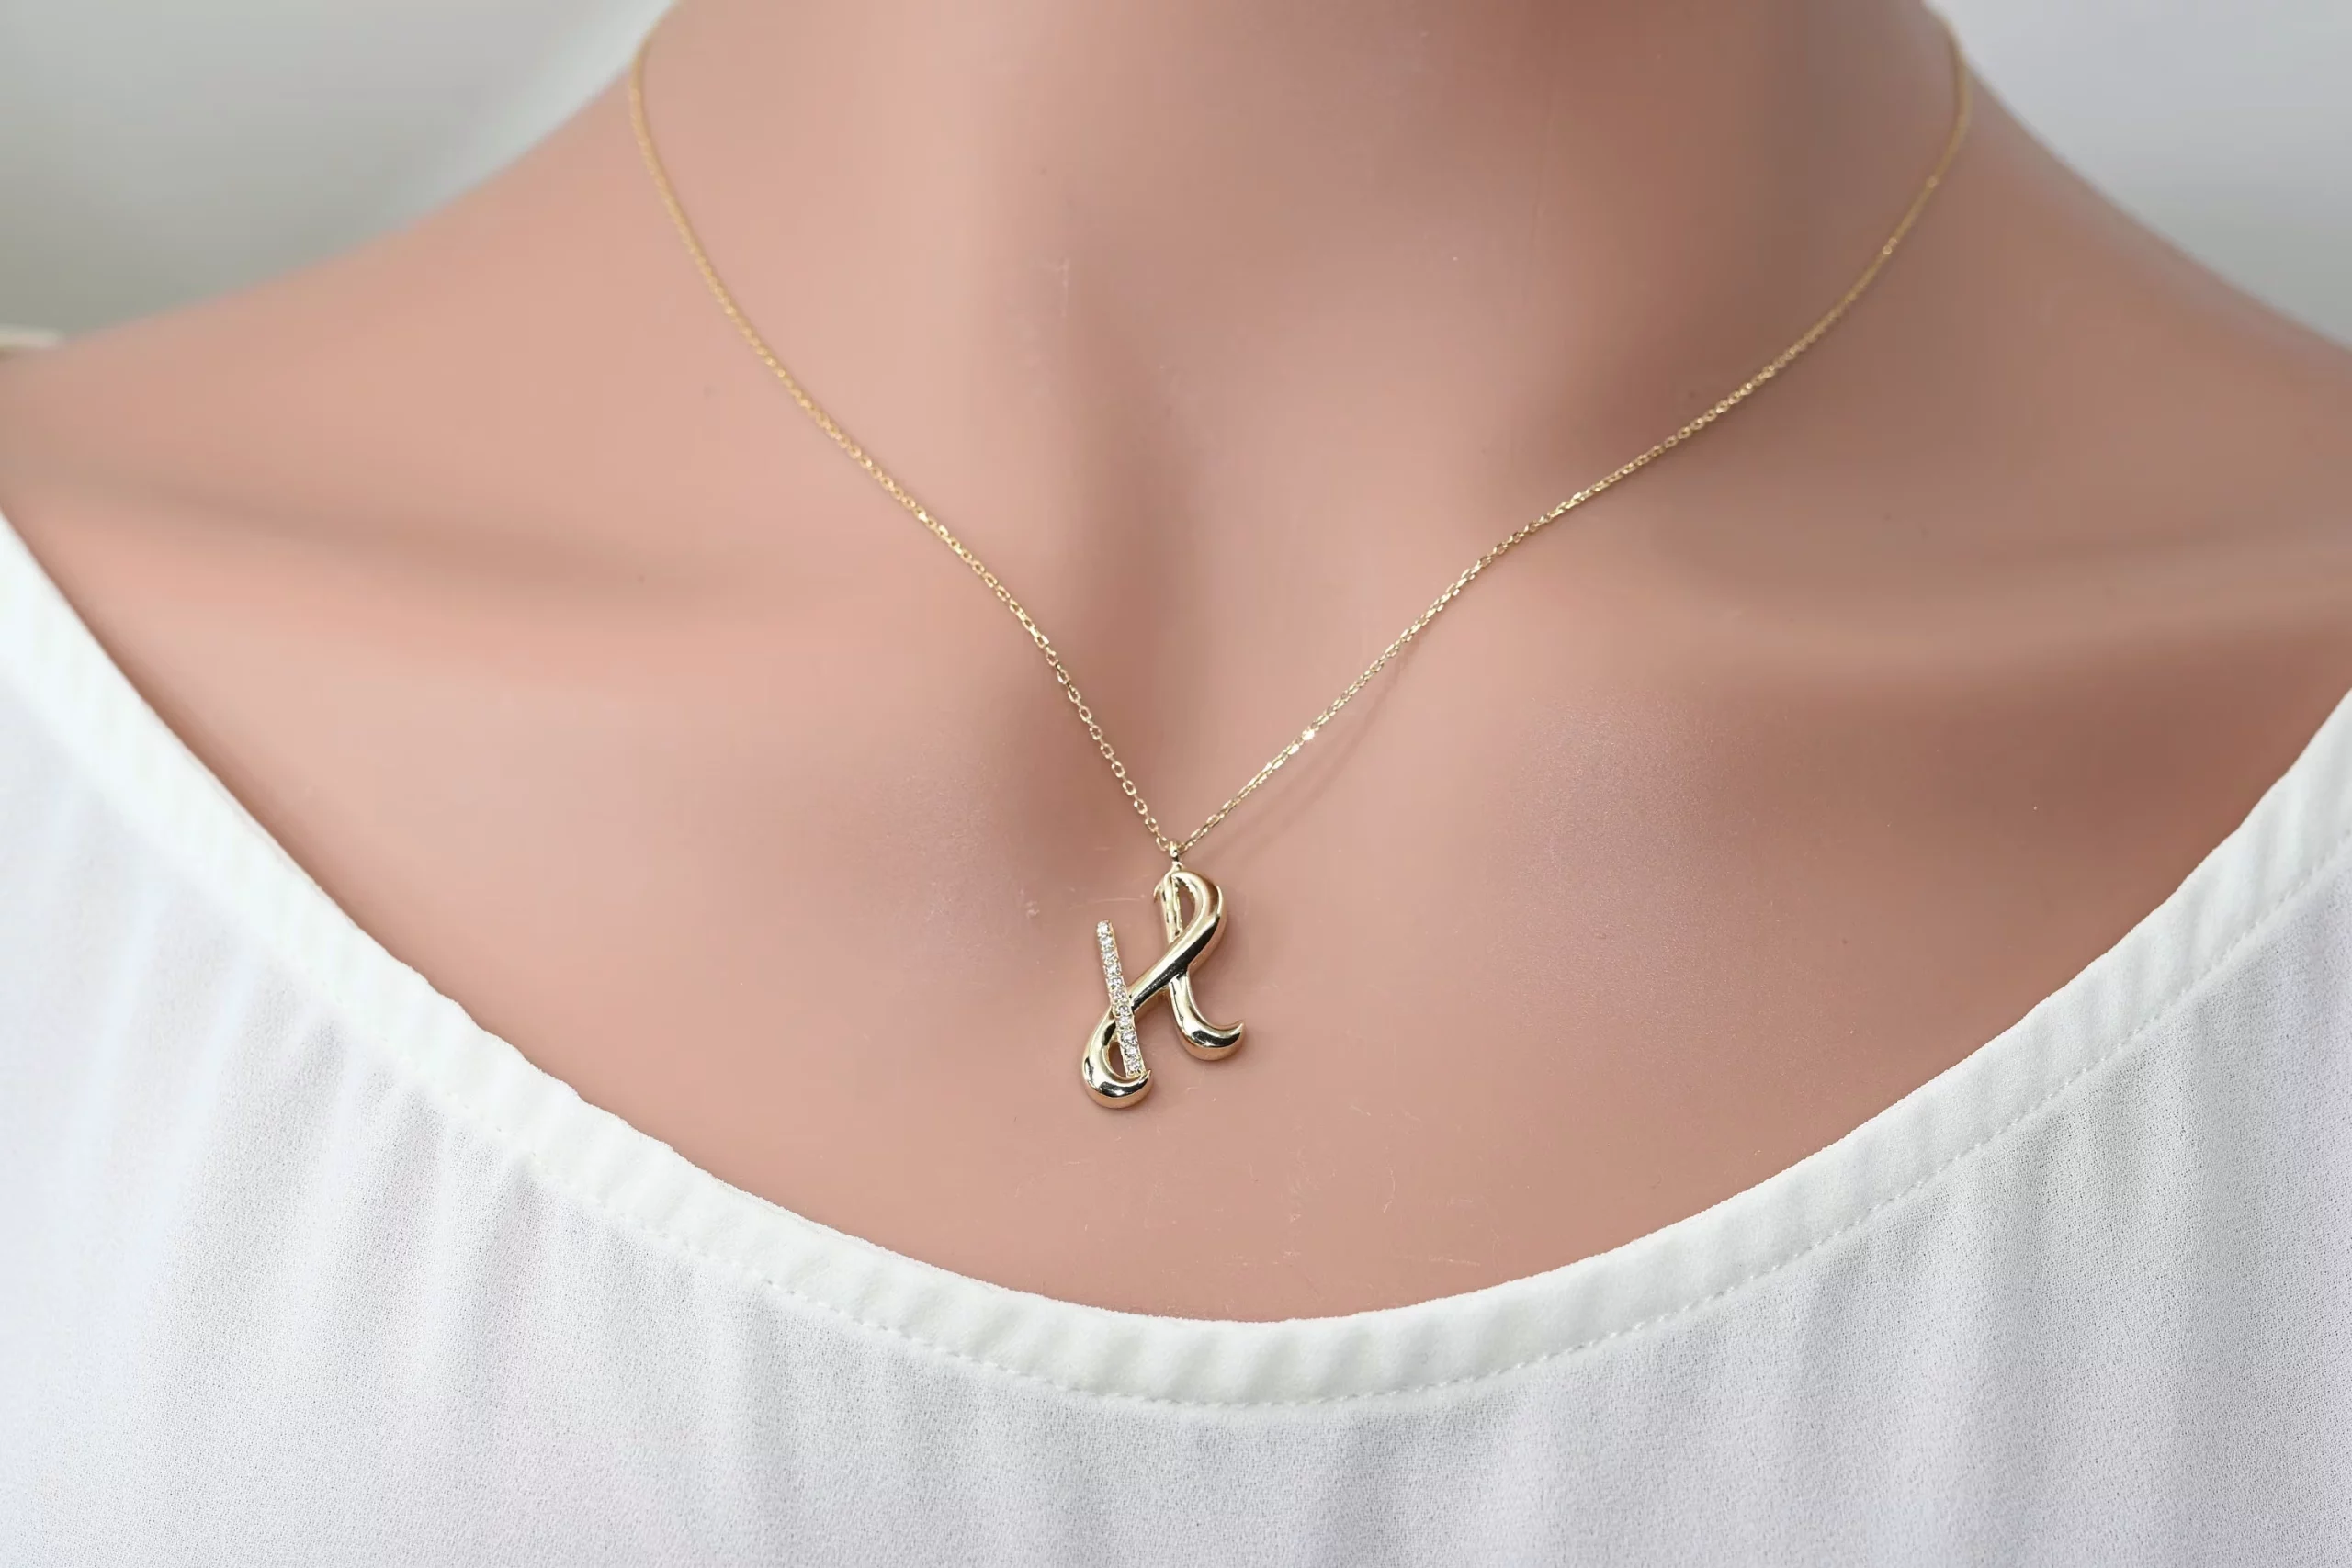 H Necklace: A stylish and Unique Type Of Necklace